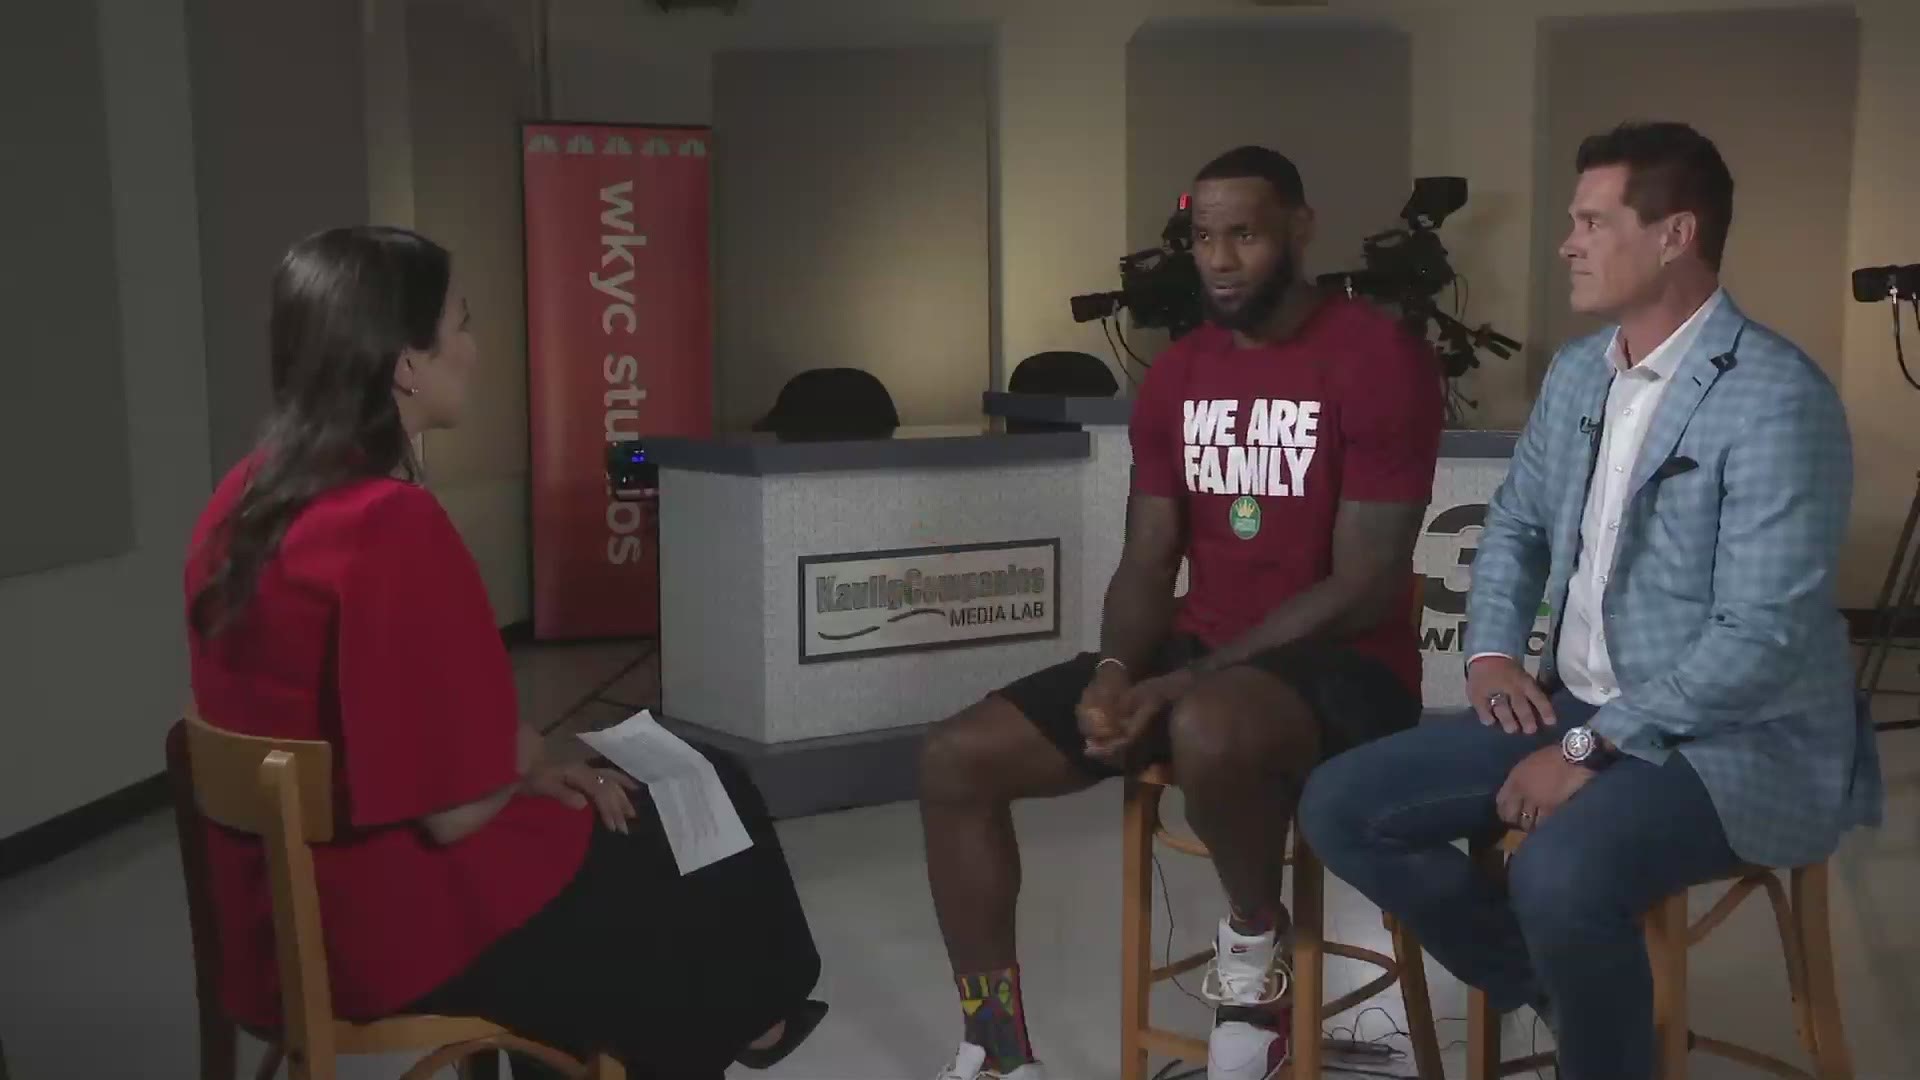 One year after the I PROMISE School opened, LeBron James returned to help open the Kaulig Companies Media Lab